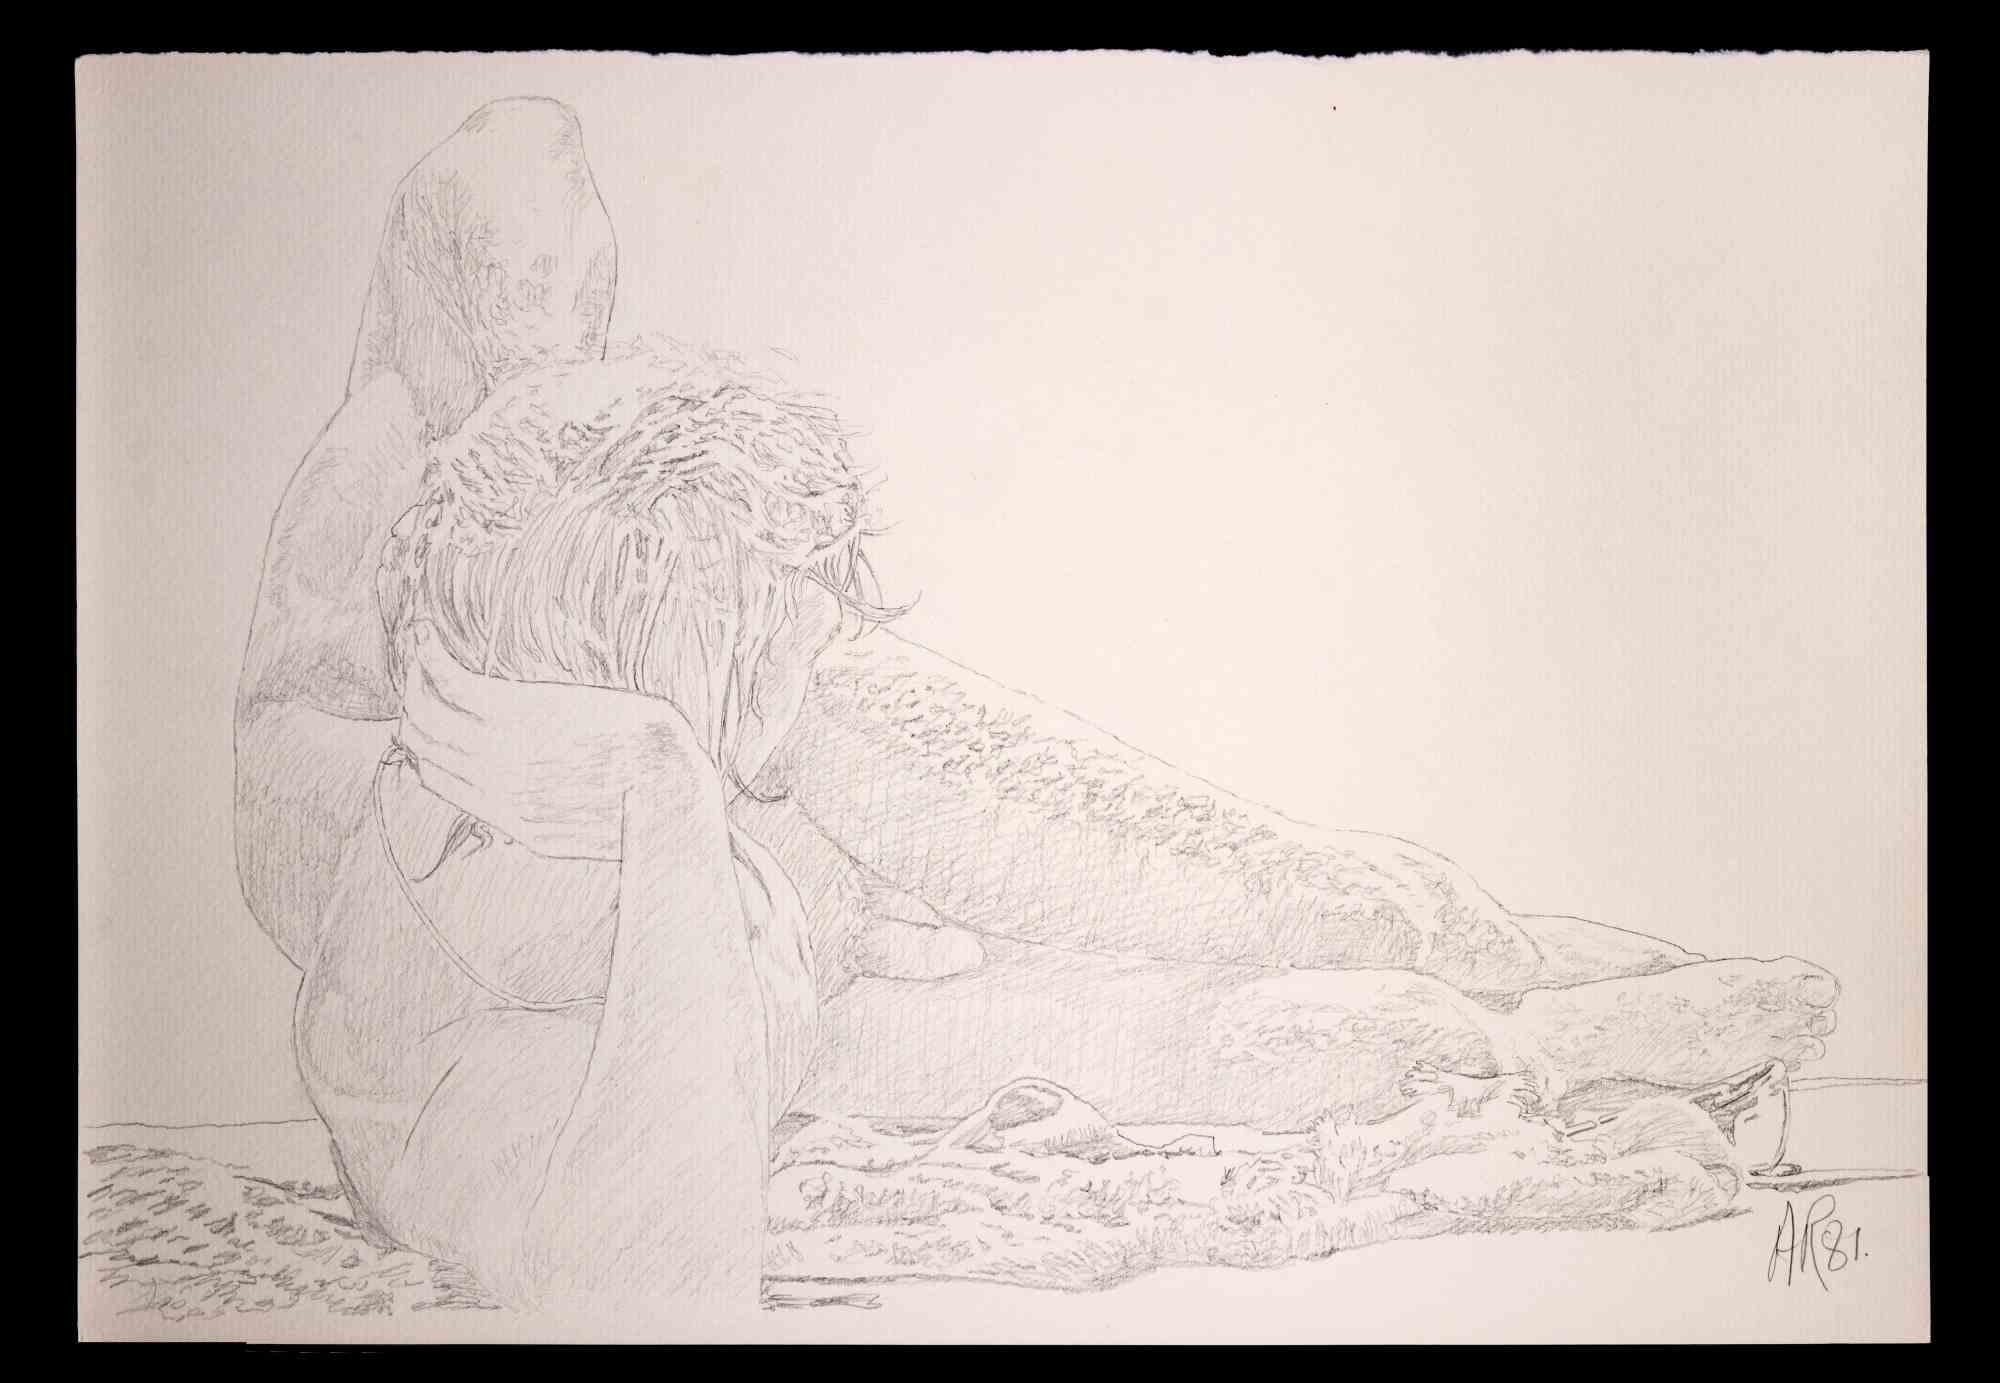 Boy lying down is an original drawing on pencil realized by Anthony Roaland in 1981. Hand-signed and dated by the artist on the lower right margin. 

In the foreground the figure is depicted with a delicate and harmonious style.

Good conditions.